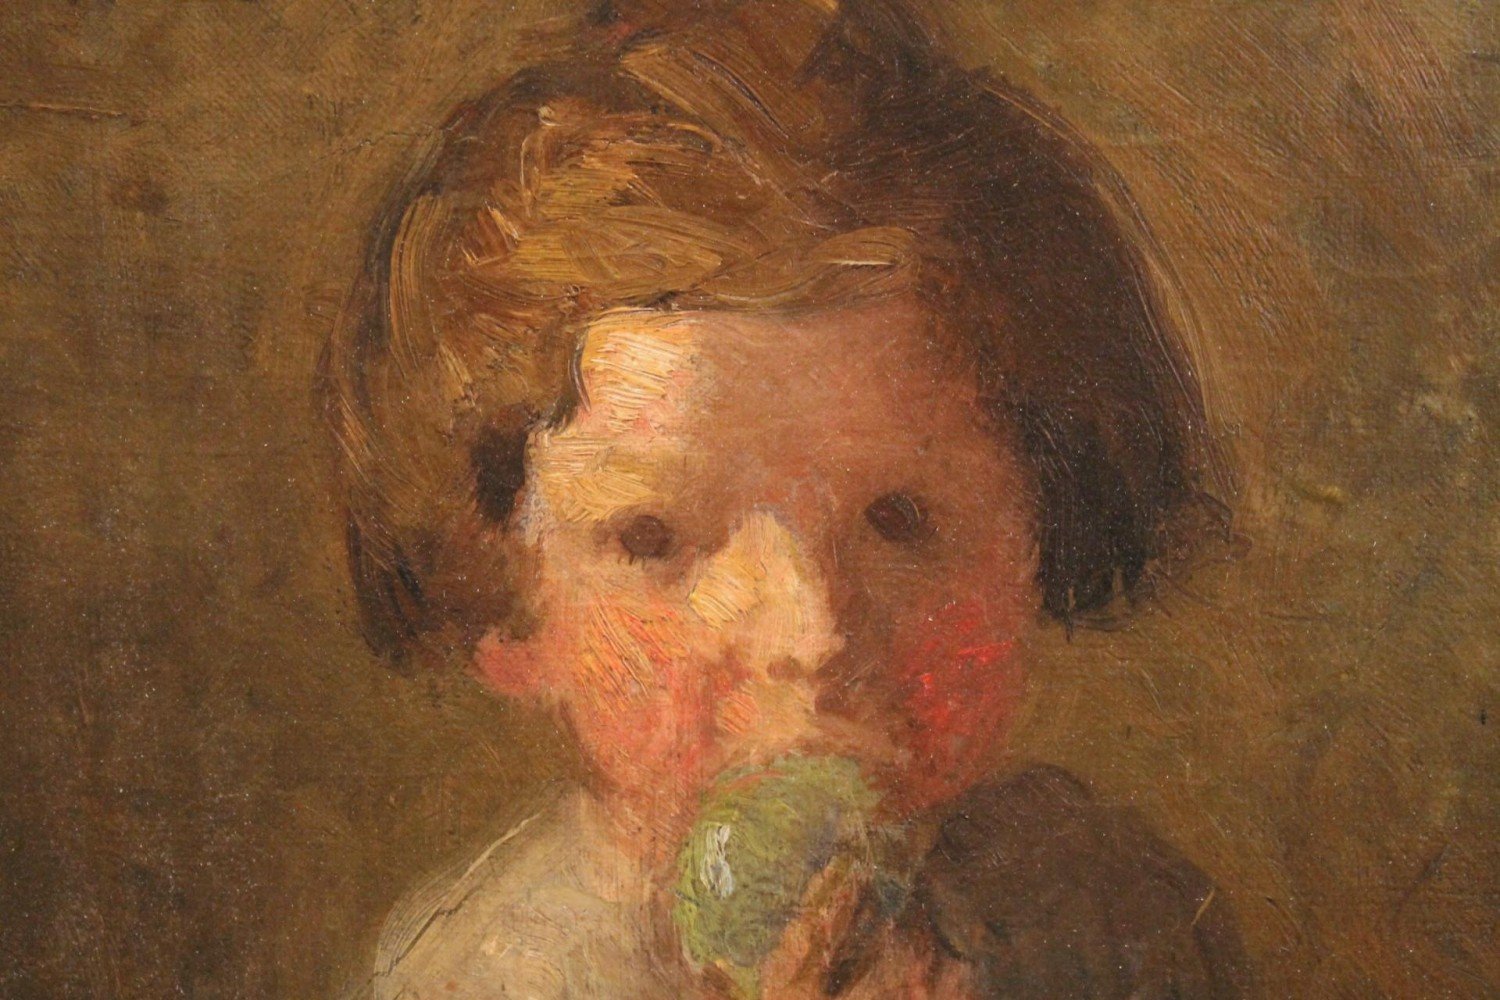 Boy Eating an Apple by William Sommer